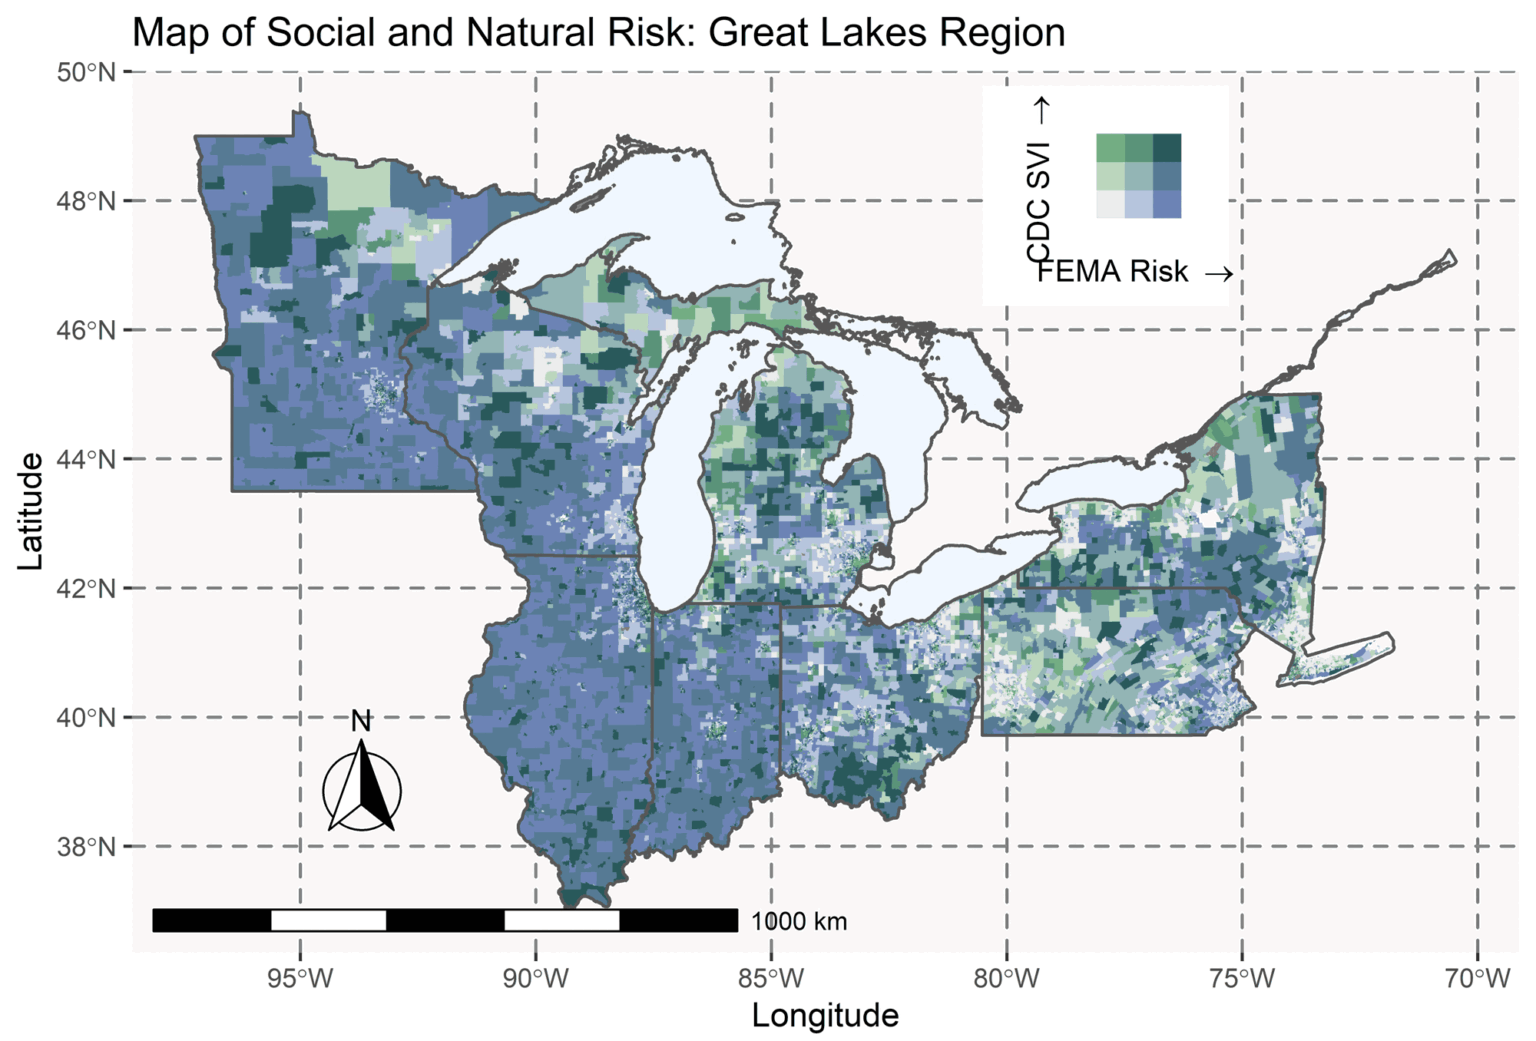 Map of social and natural risk in the Great Lakes region, using data from the FEMA National Risk Index ranks and the CDC’s Social Vulnerability Index. Dark green represents high vulnerabilities in both FEMA risk and the social vulnerability index. Gray indicates low vulnerabilities for both. Blue indicates high FEMA risk, while green indicates a high social vulnerability index ranking. Image credit: Van Berkel et al., “Planning for climate migration in Great Lakes Legacy Cities,” Earth’s Future, October 2022